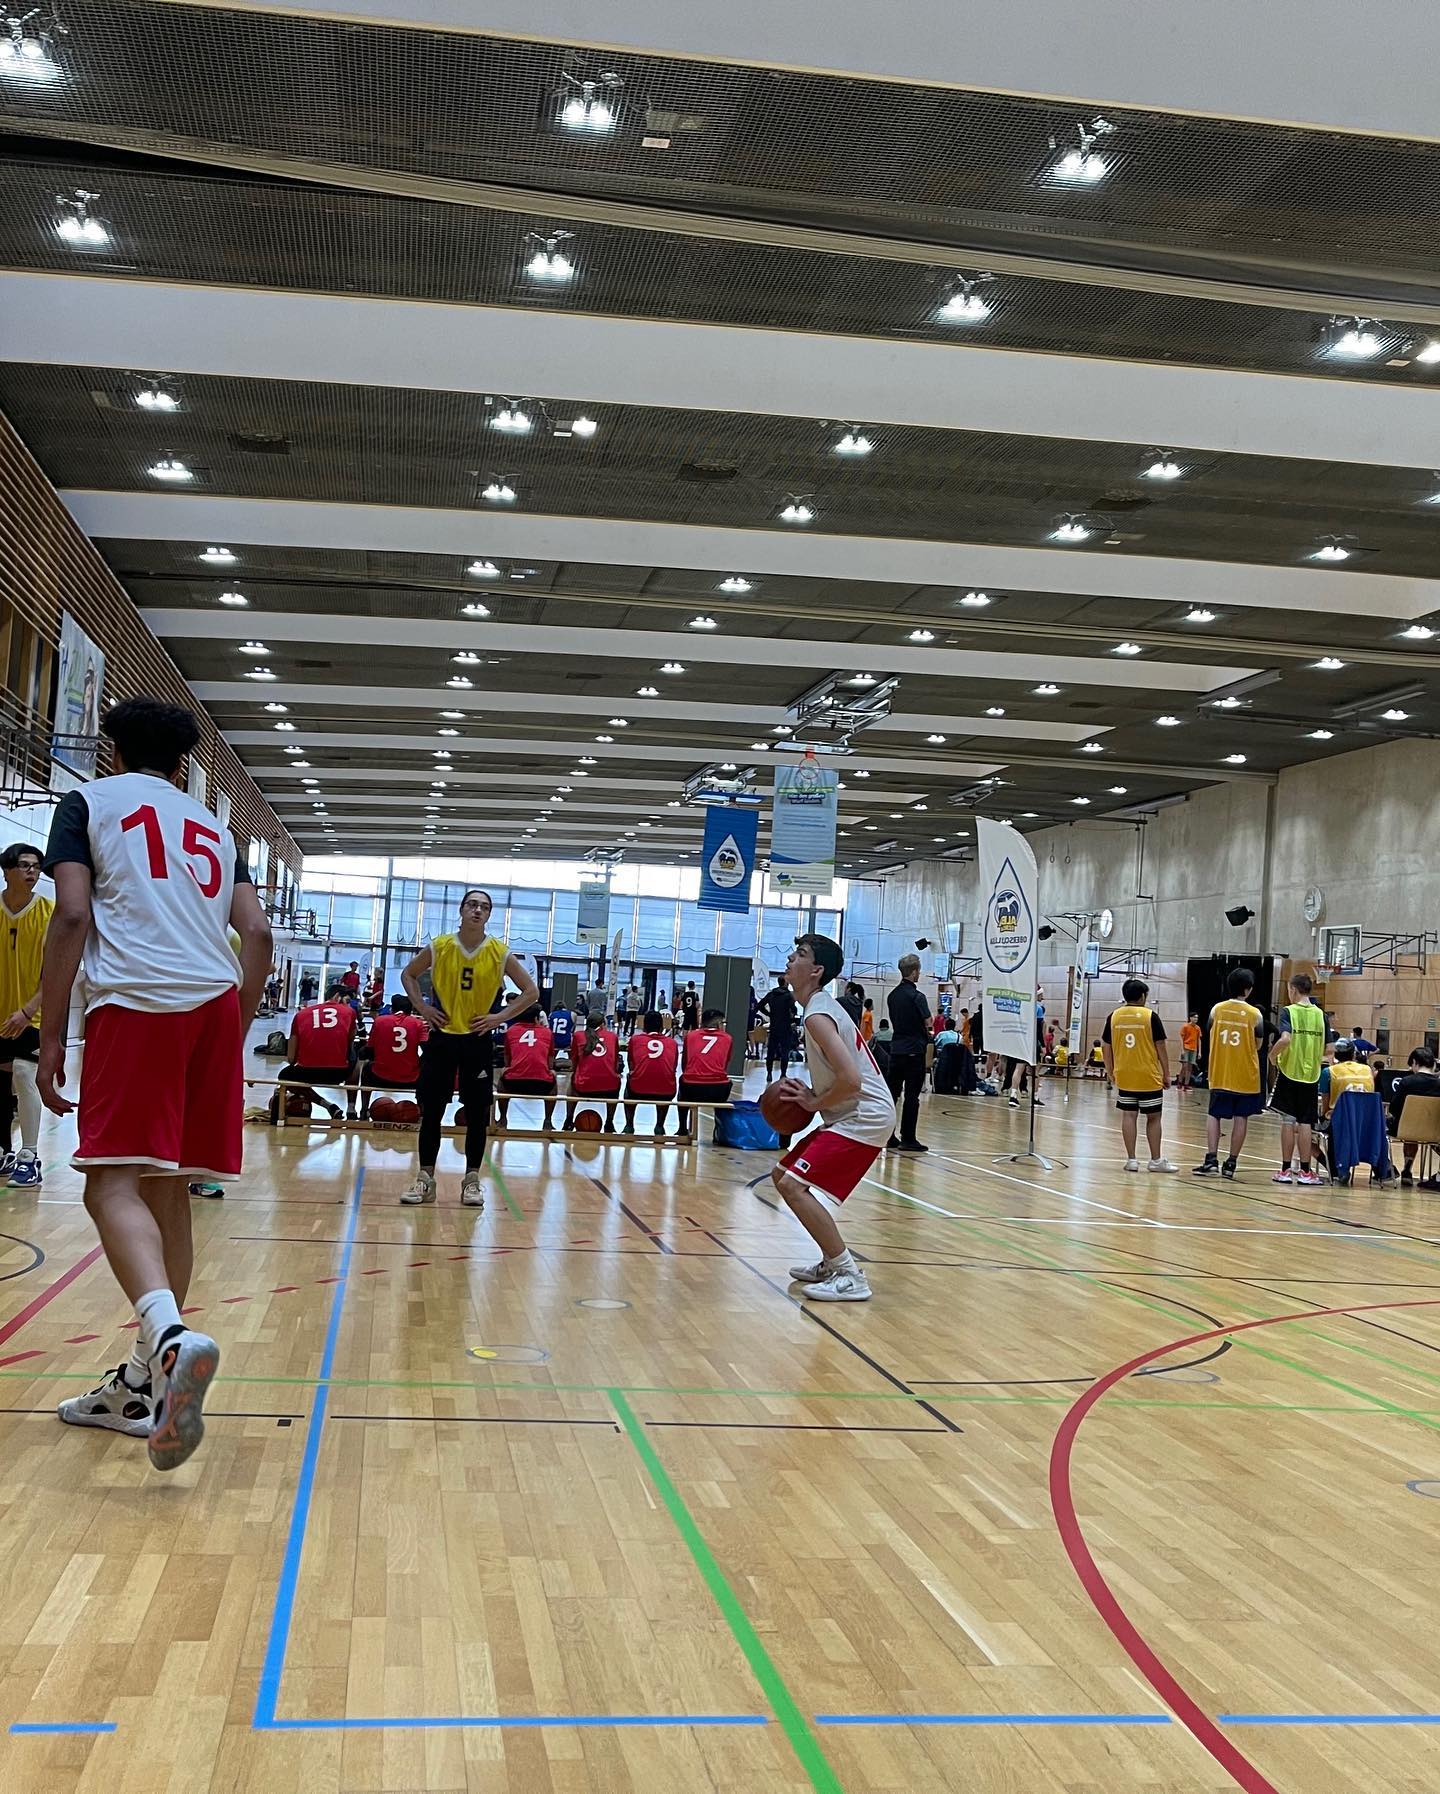 Students playing Basketball in an indoor hall